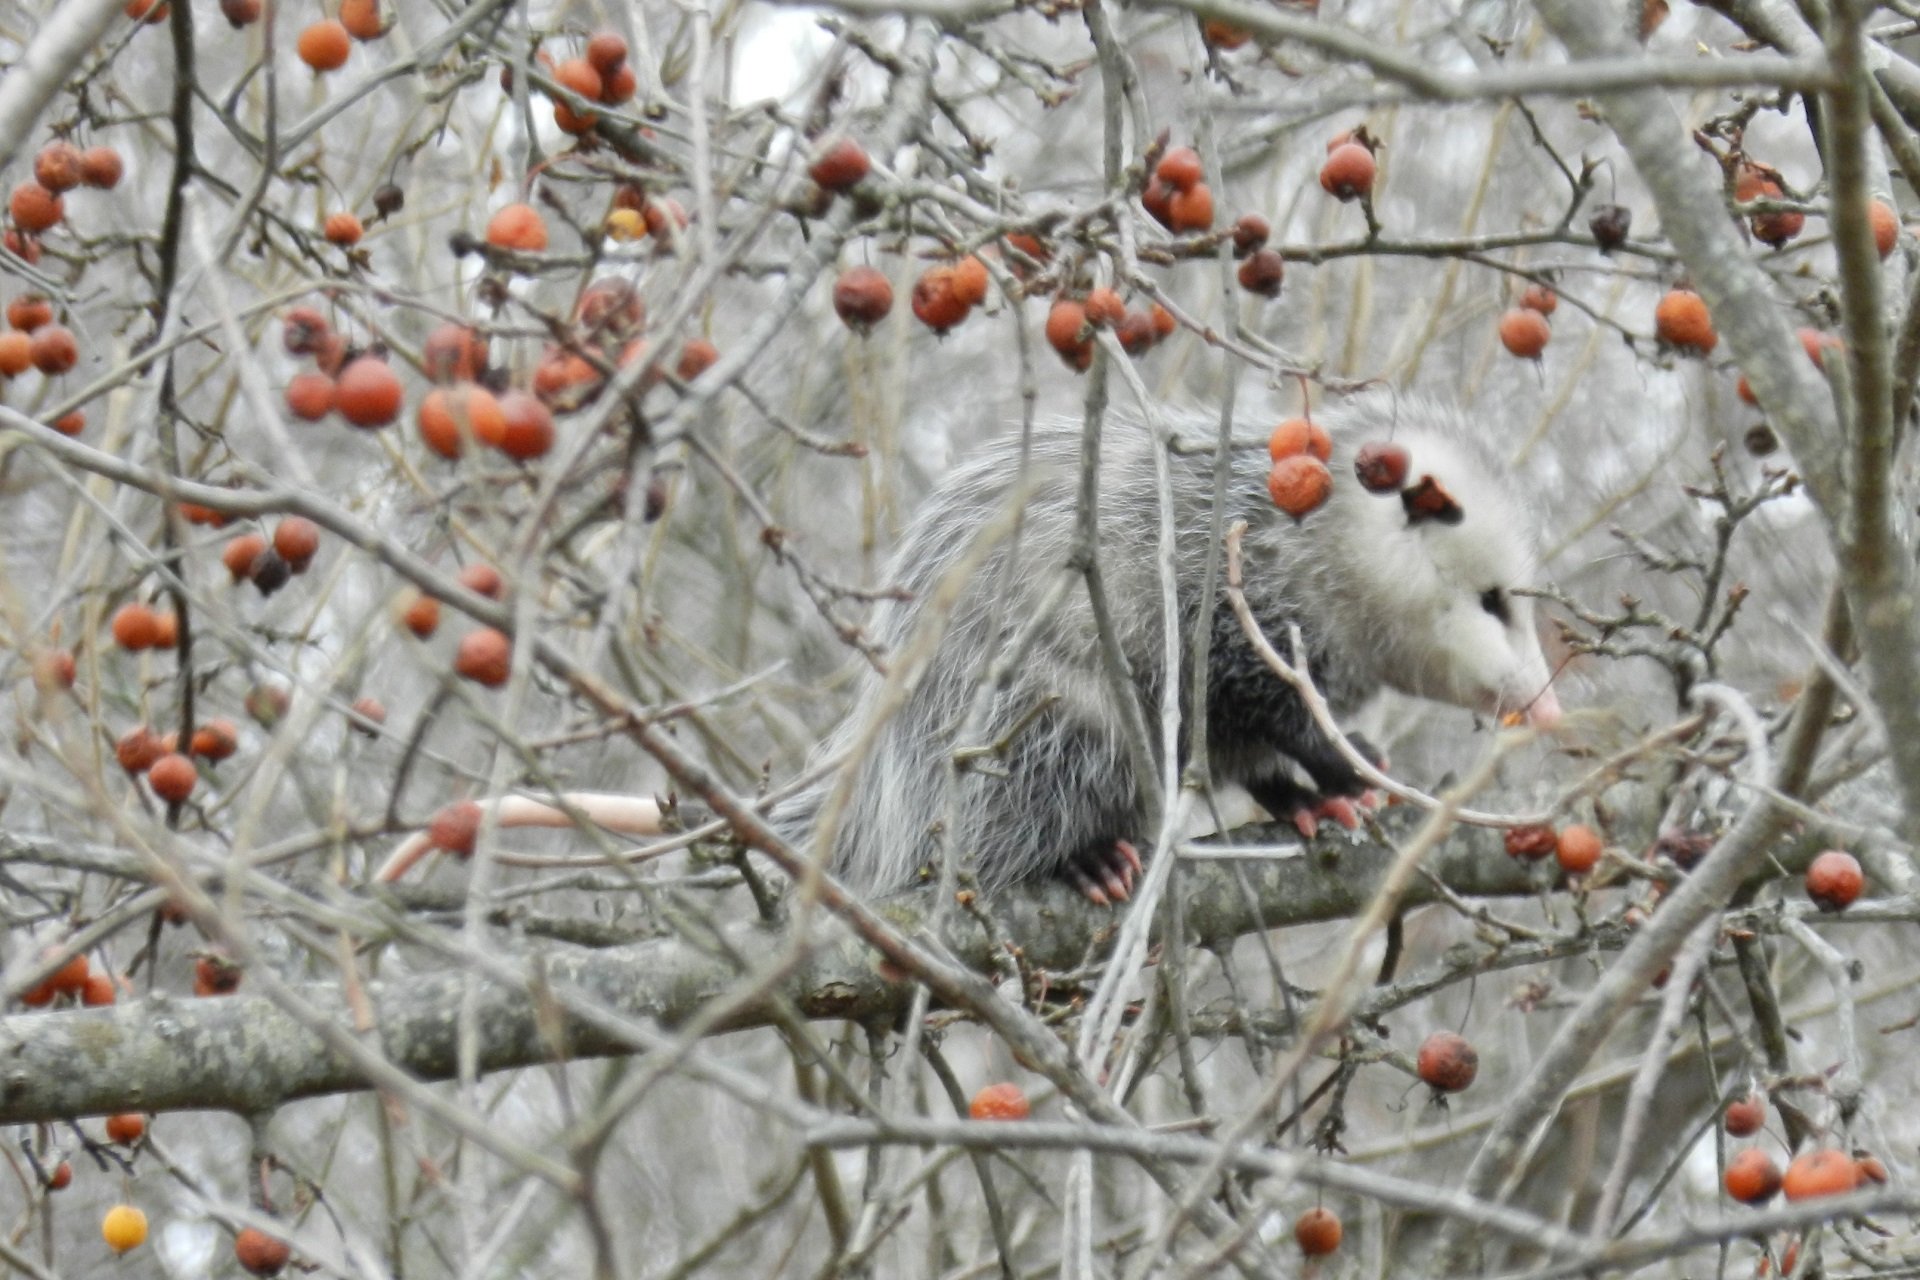 An opossum sits on a tree branch amid red fruits in the middle of winter.